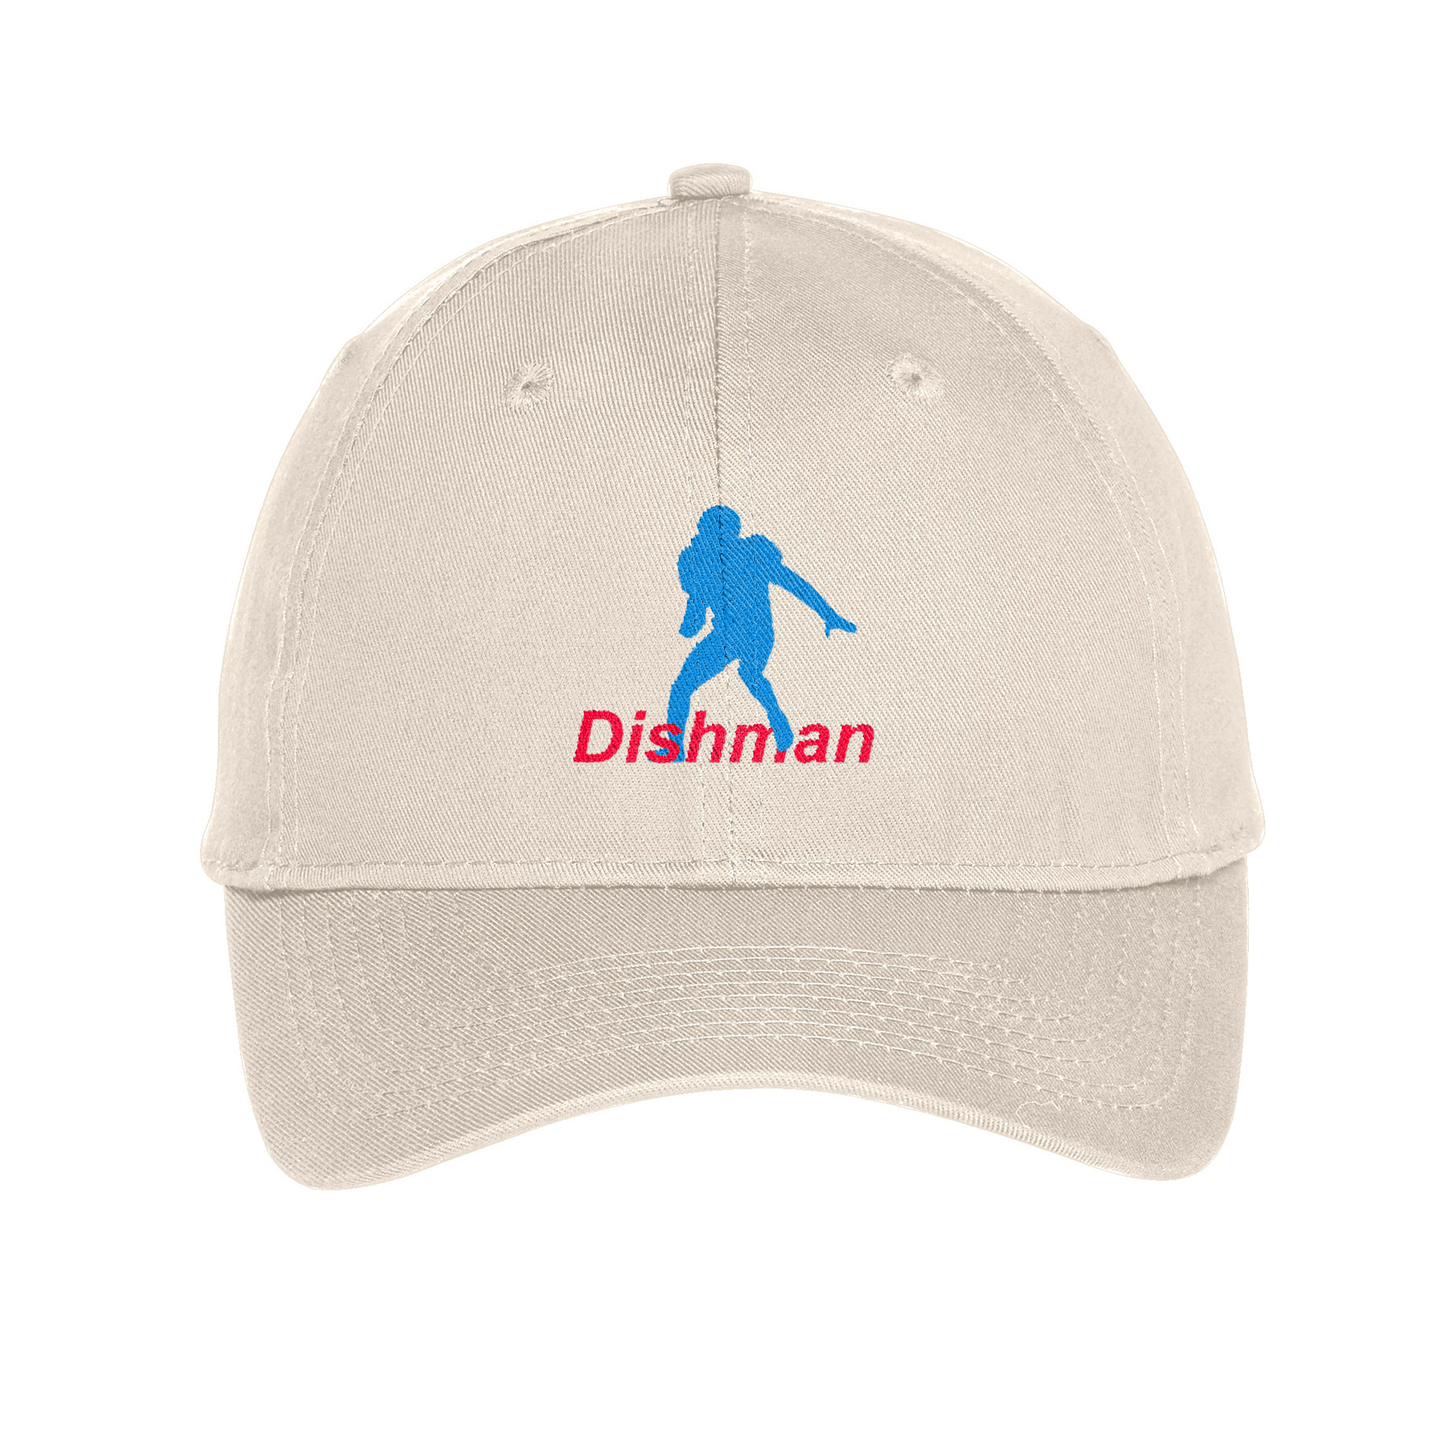 GT Dishman Embroidered Twill Cap